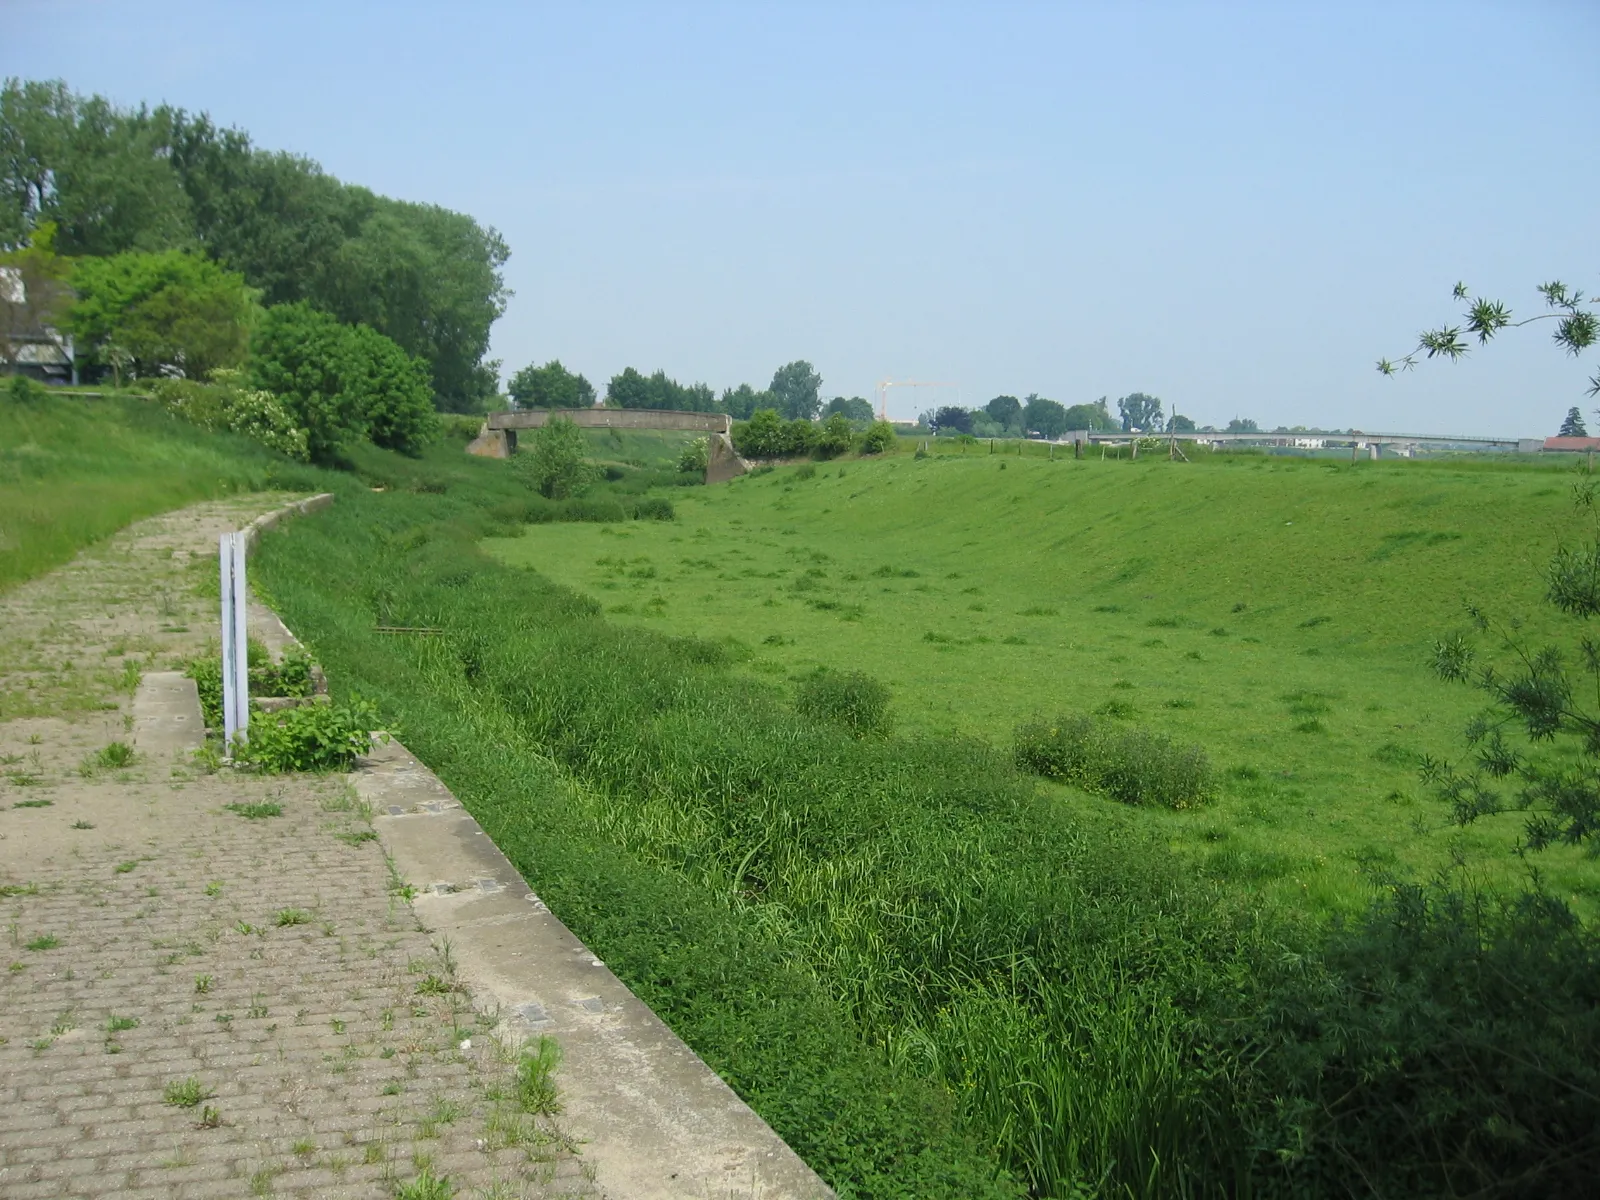 Photo showing: Quay of the former harbor of Maaseik. The currently dried up river was an ancient arm of the Meuse River.